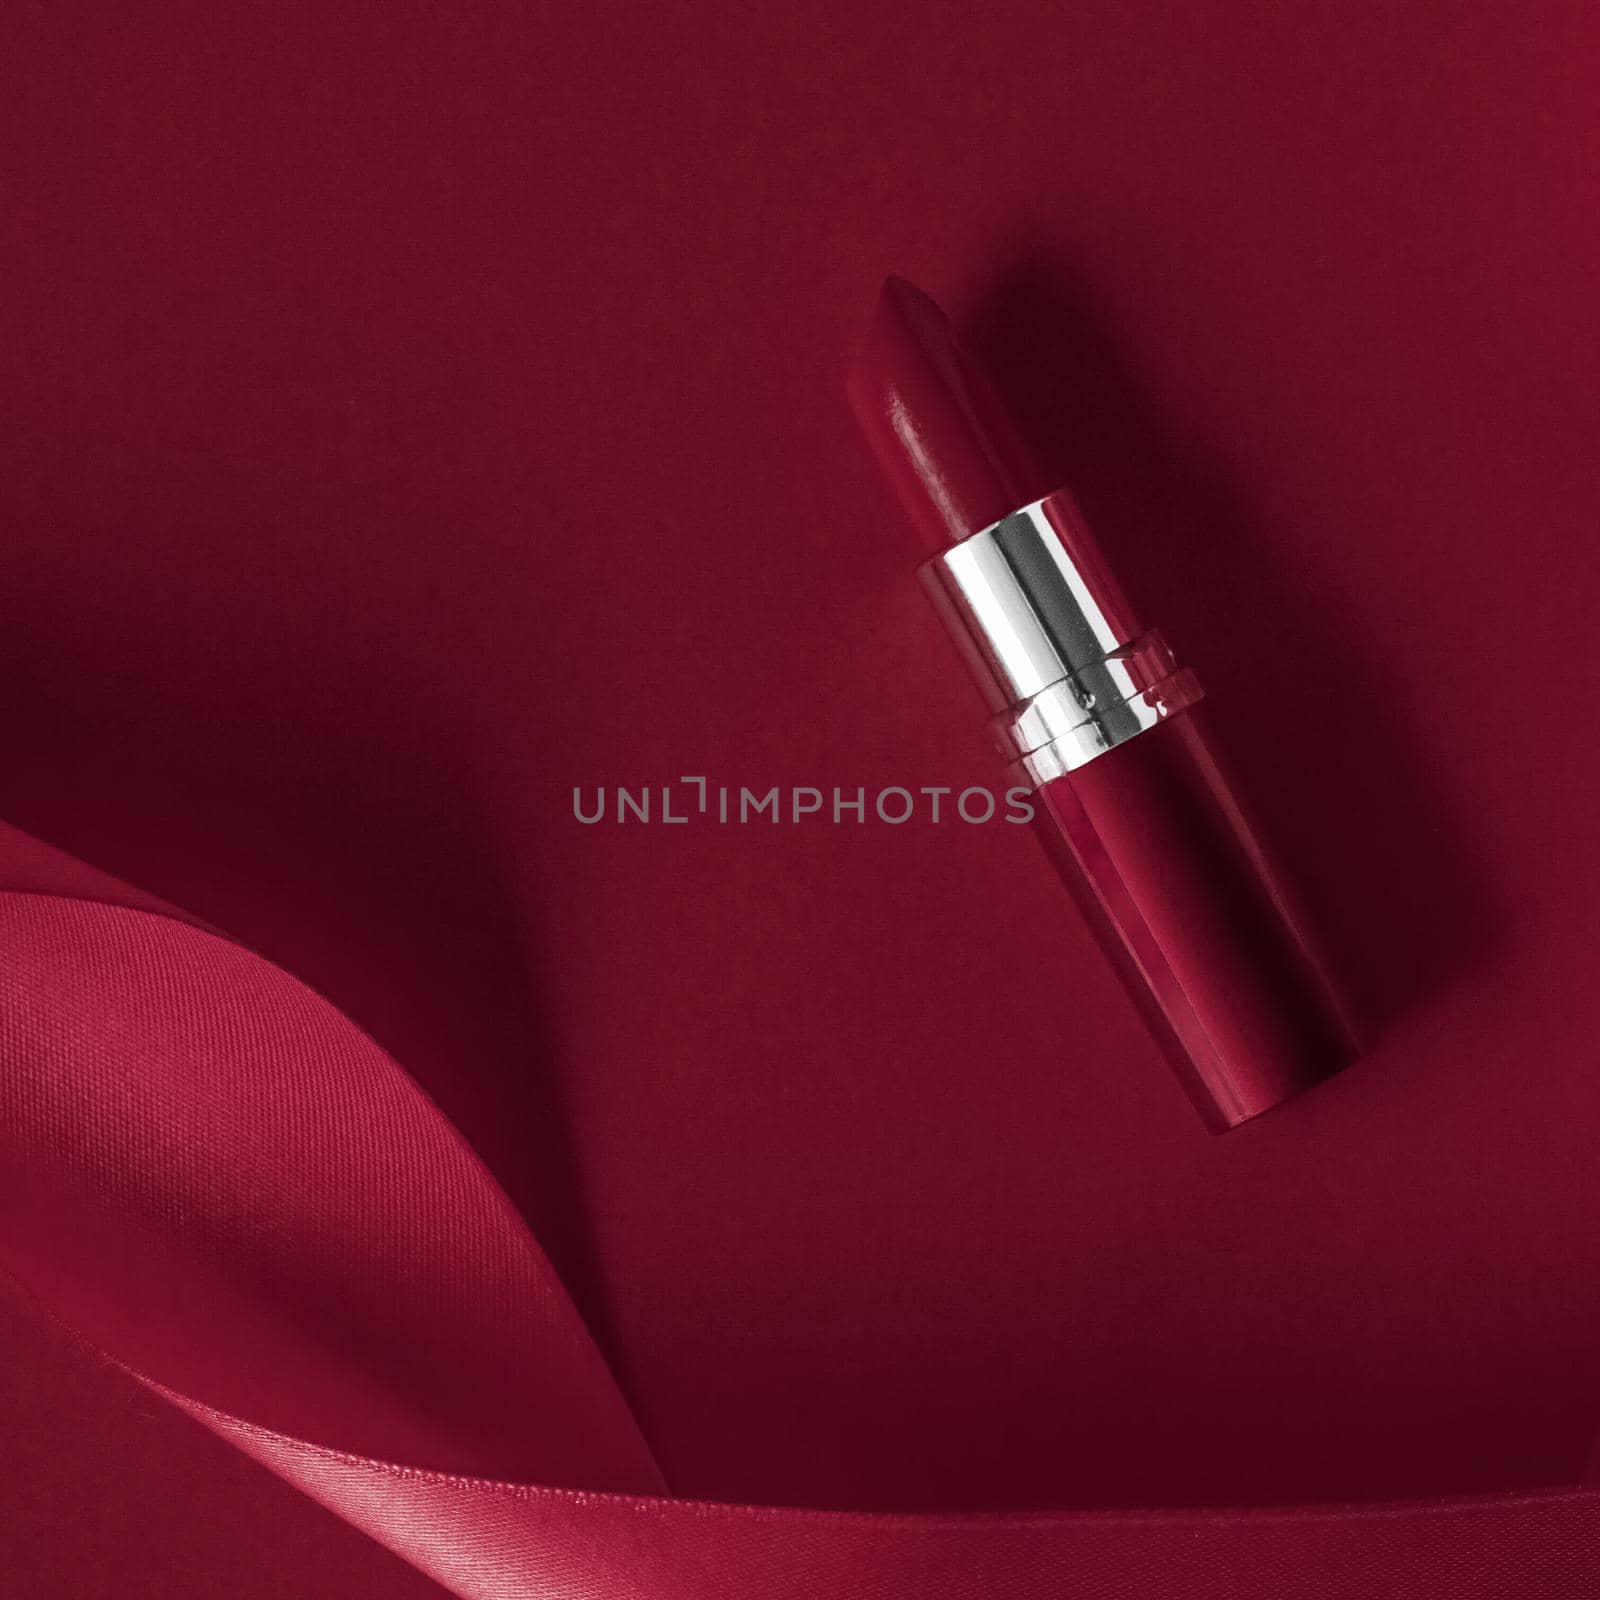 Luxury lipstick and silk ribbon on maroon holiday background, make-up and cosmetics flatlay for beauty brand product design by Anneleven